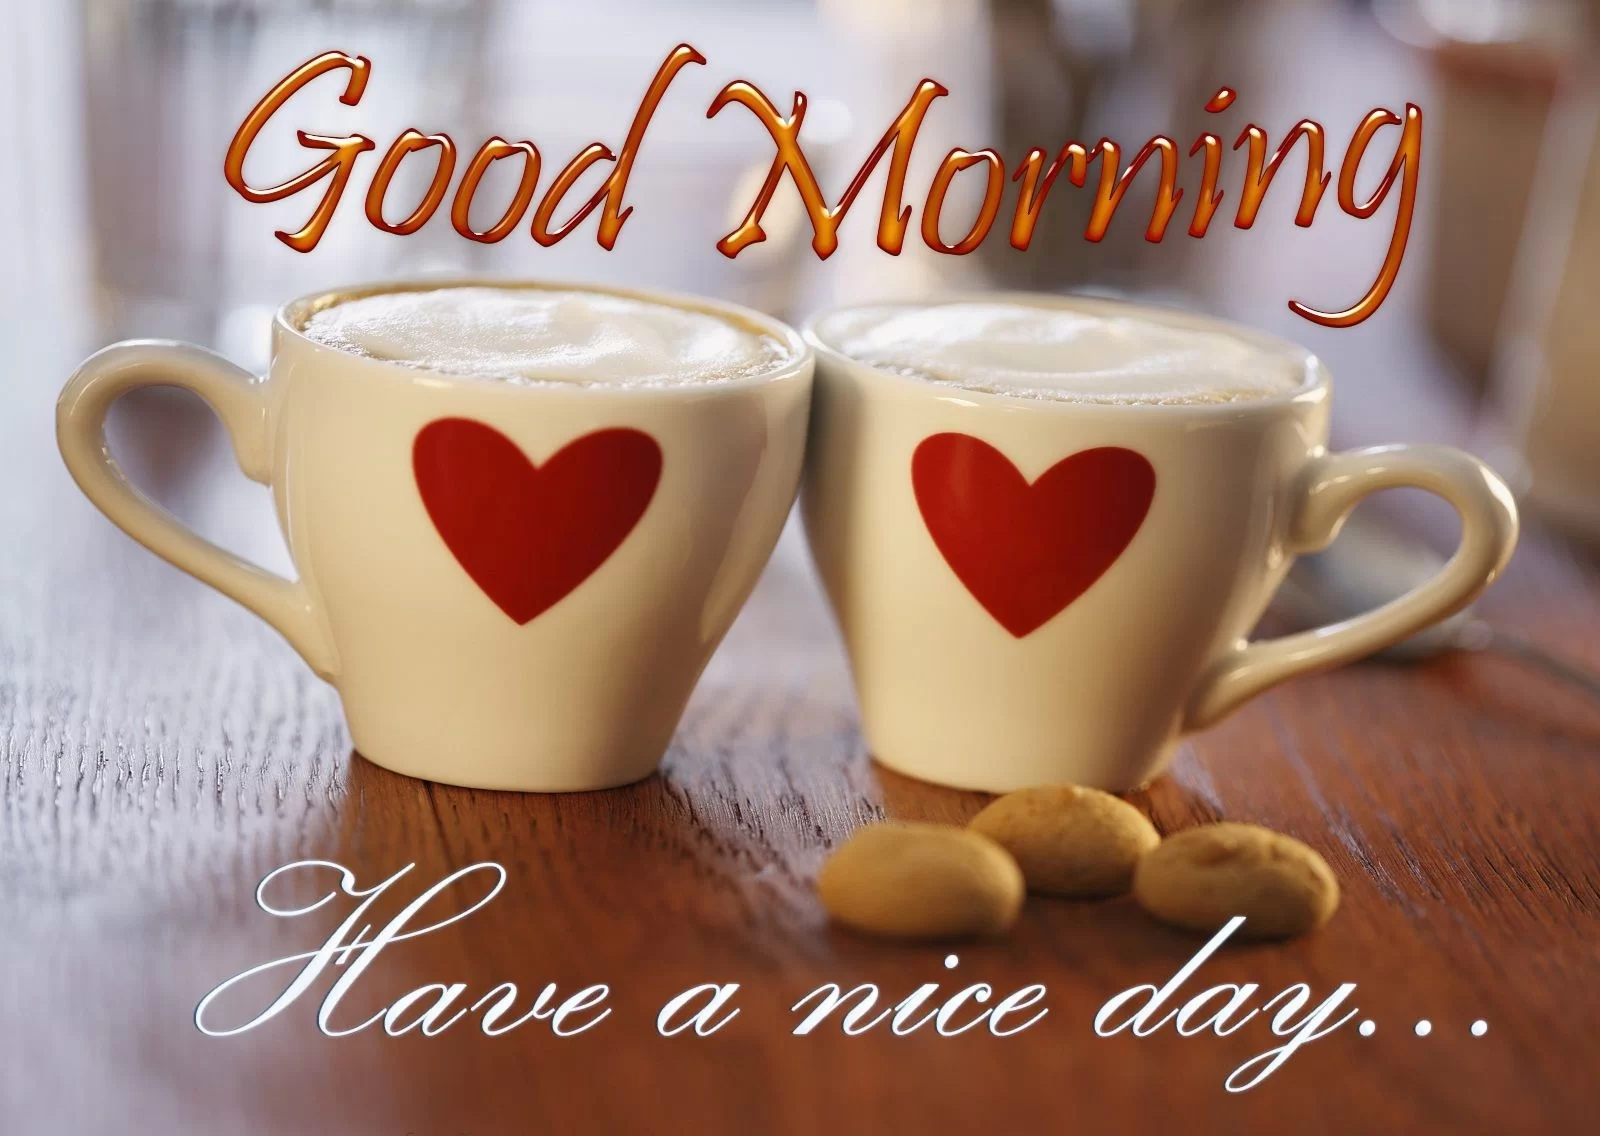 Good Morning Have a Nice Day Wallpapers